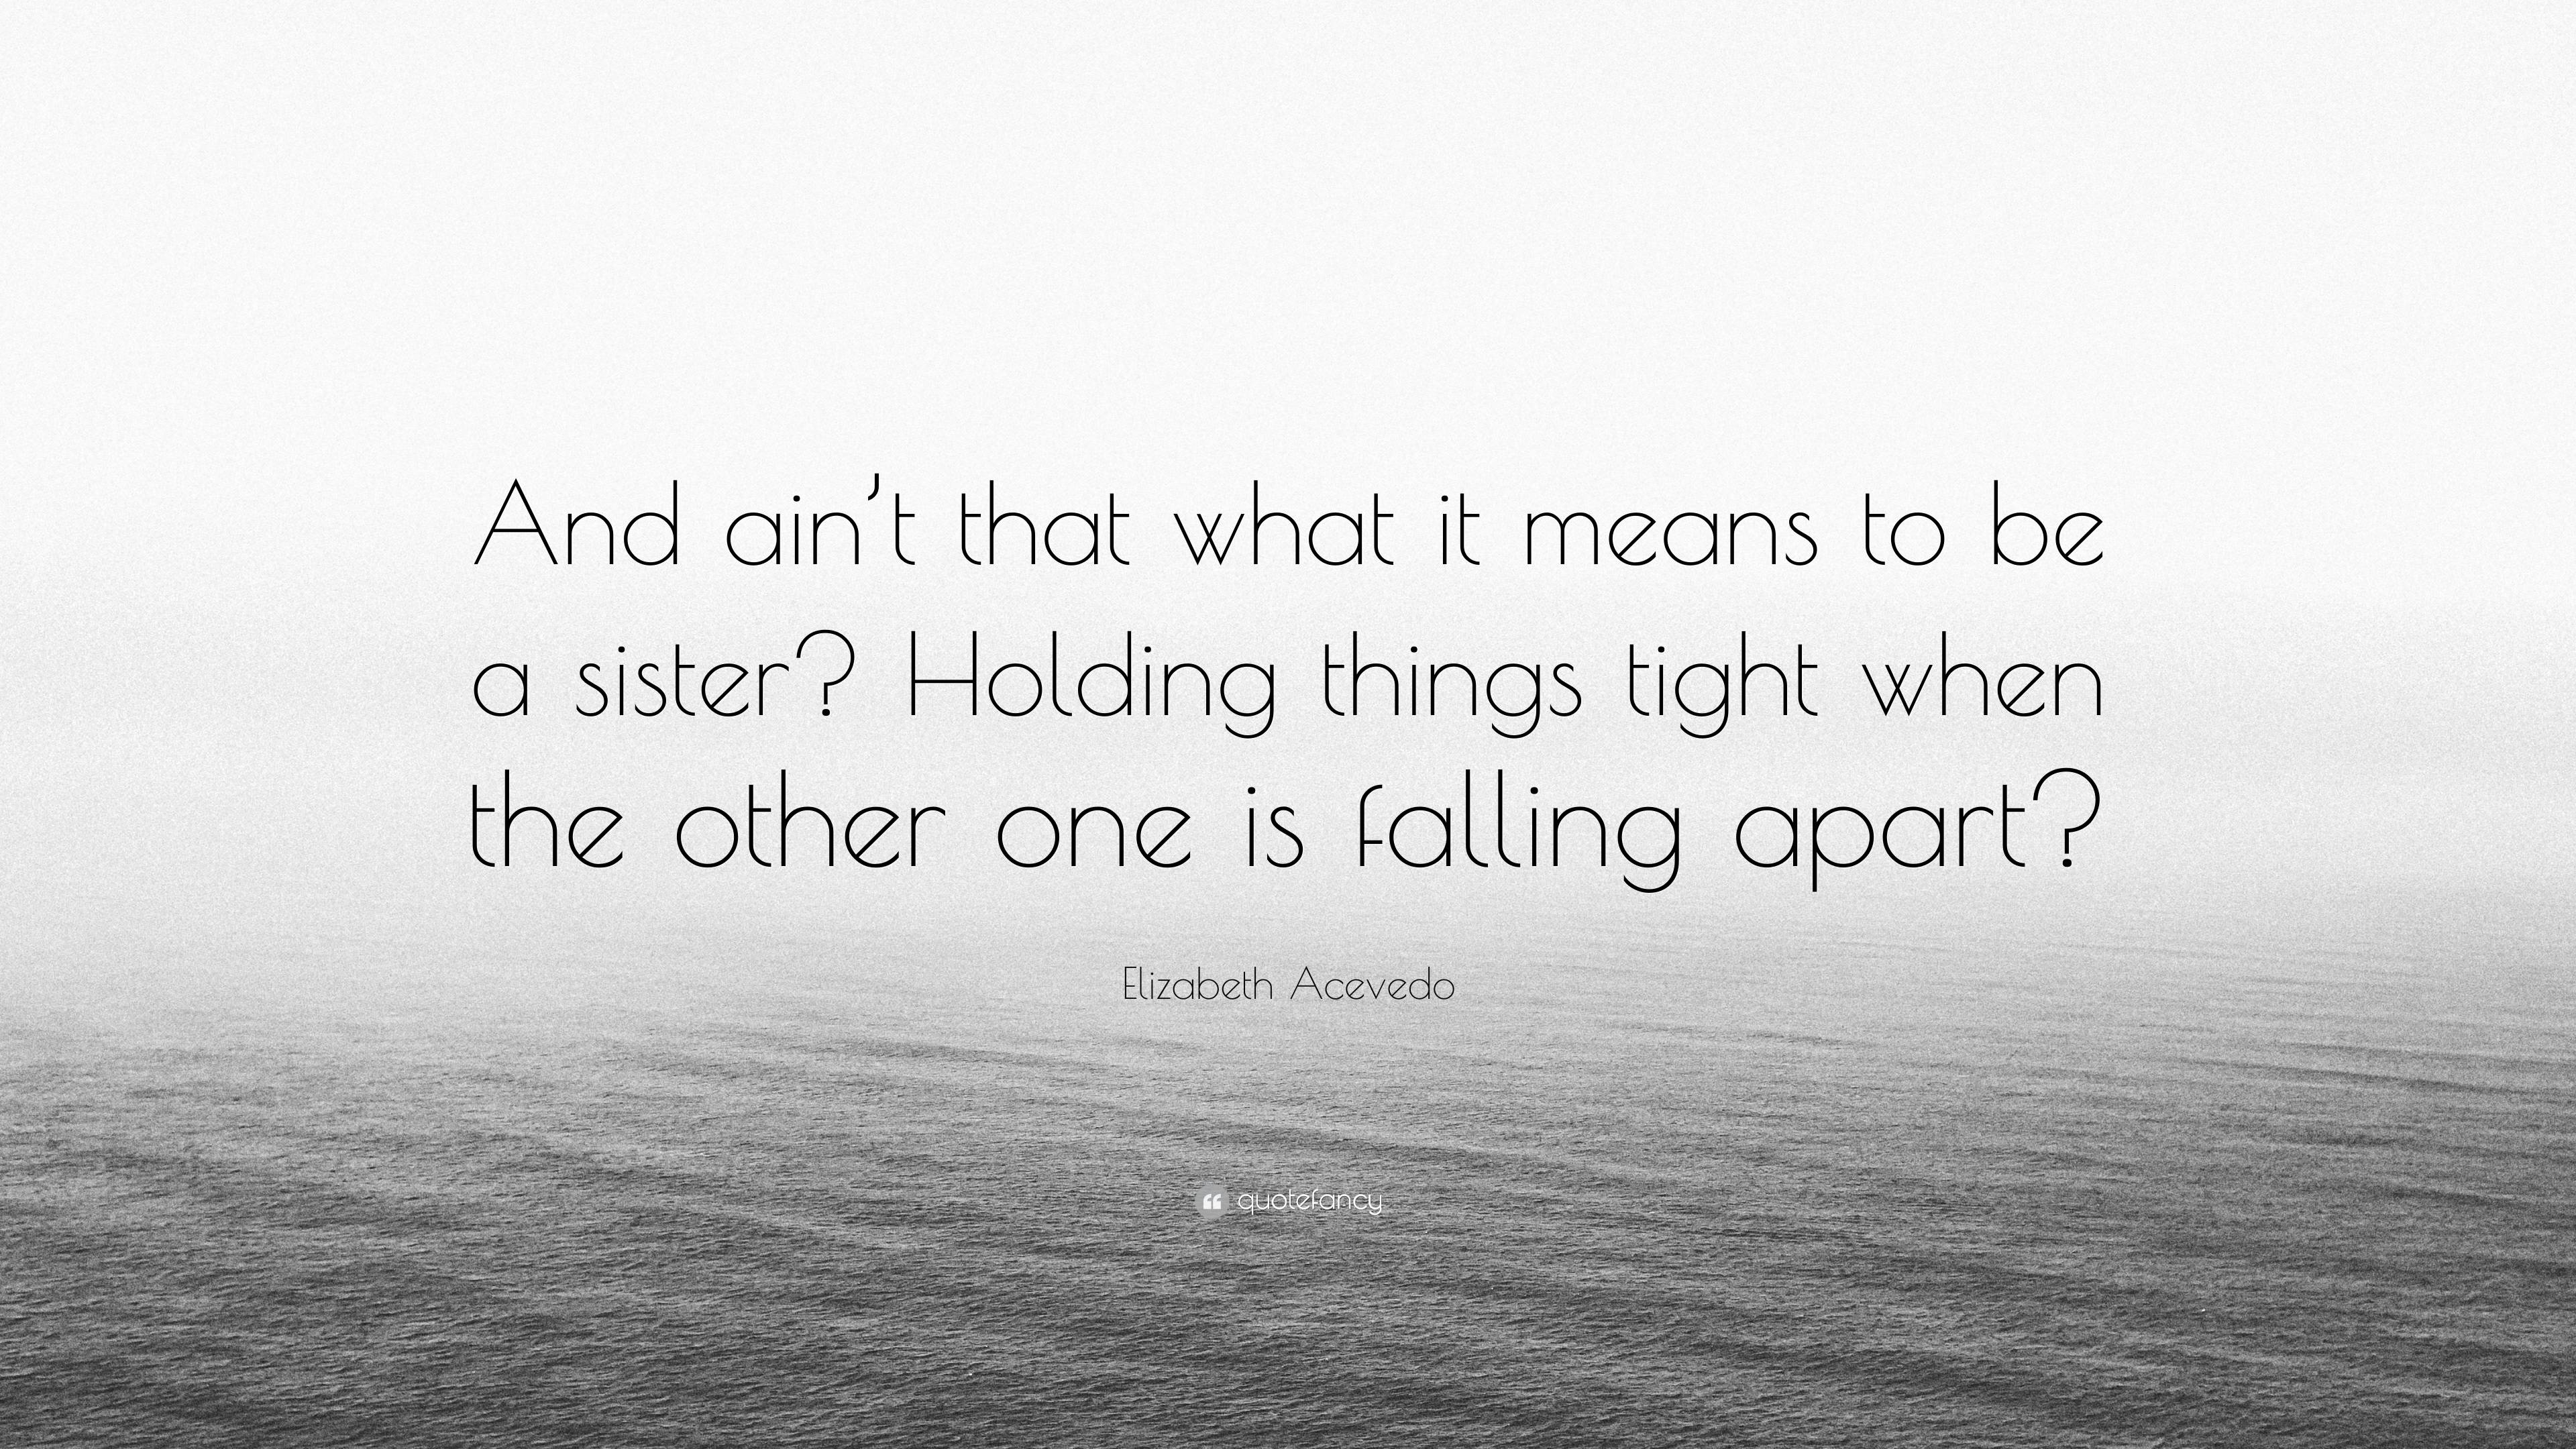 Elizabeth Acevedo Quote: “And ain't that what it means to be a sister?  Holding things